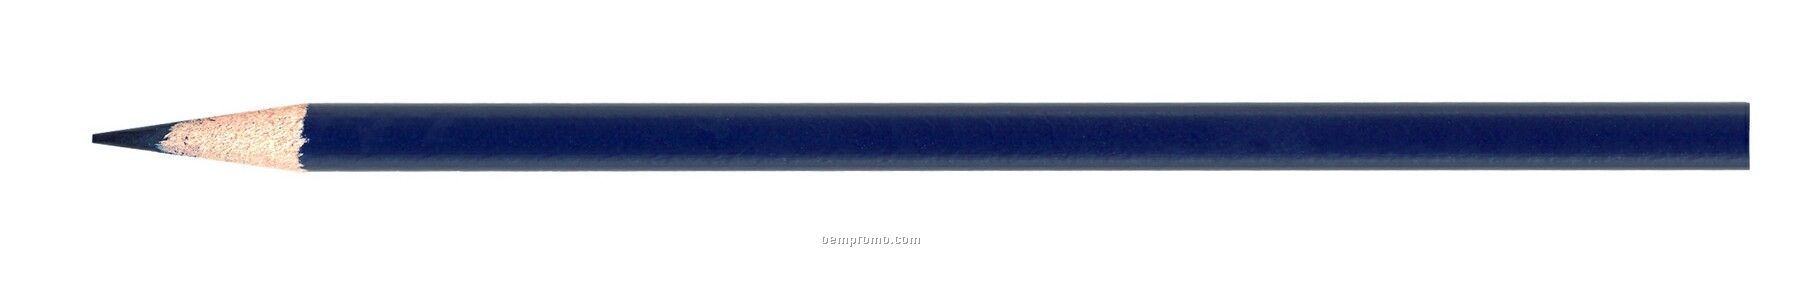 Painted Barrel Pencil W/Colored Lead - Blue